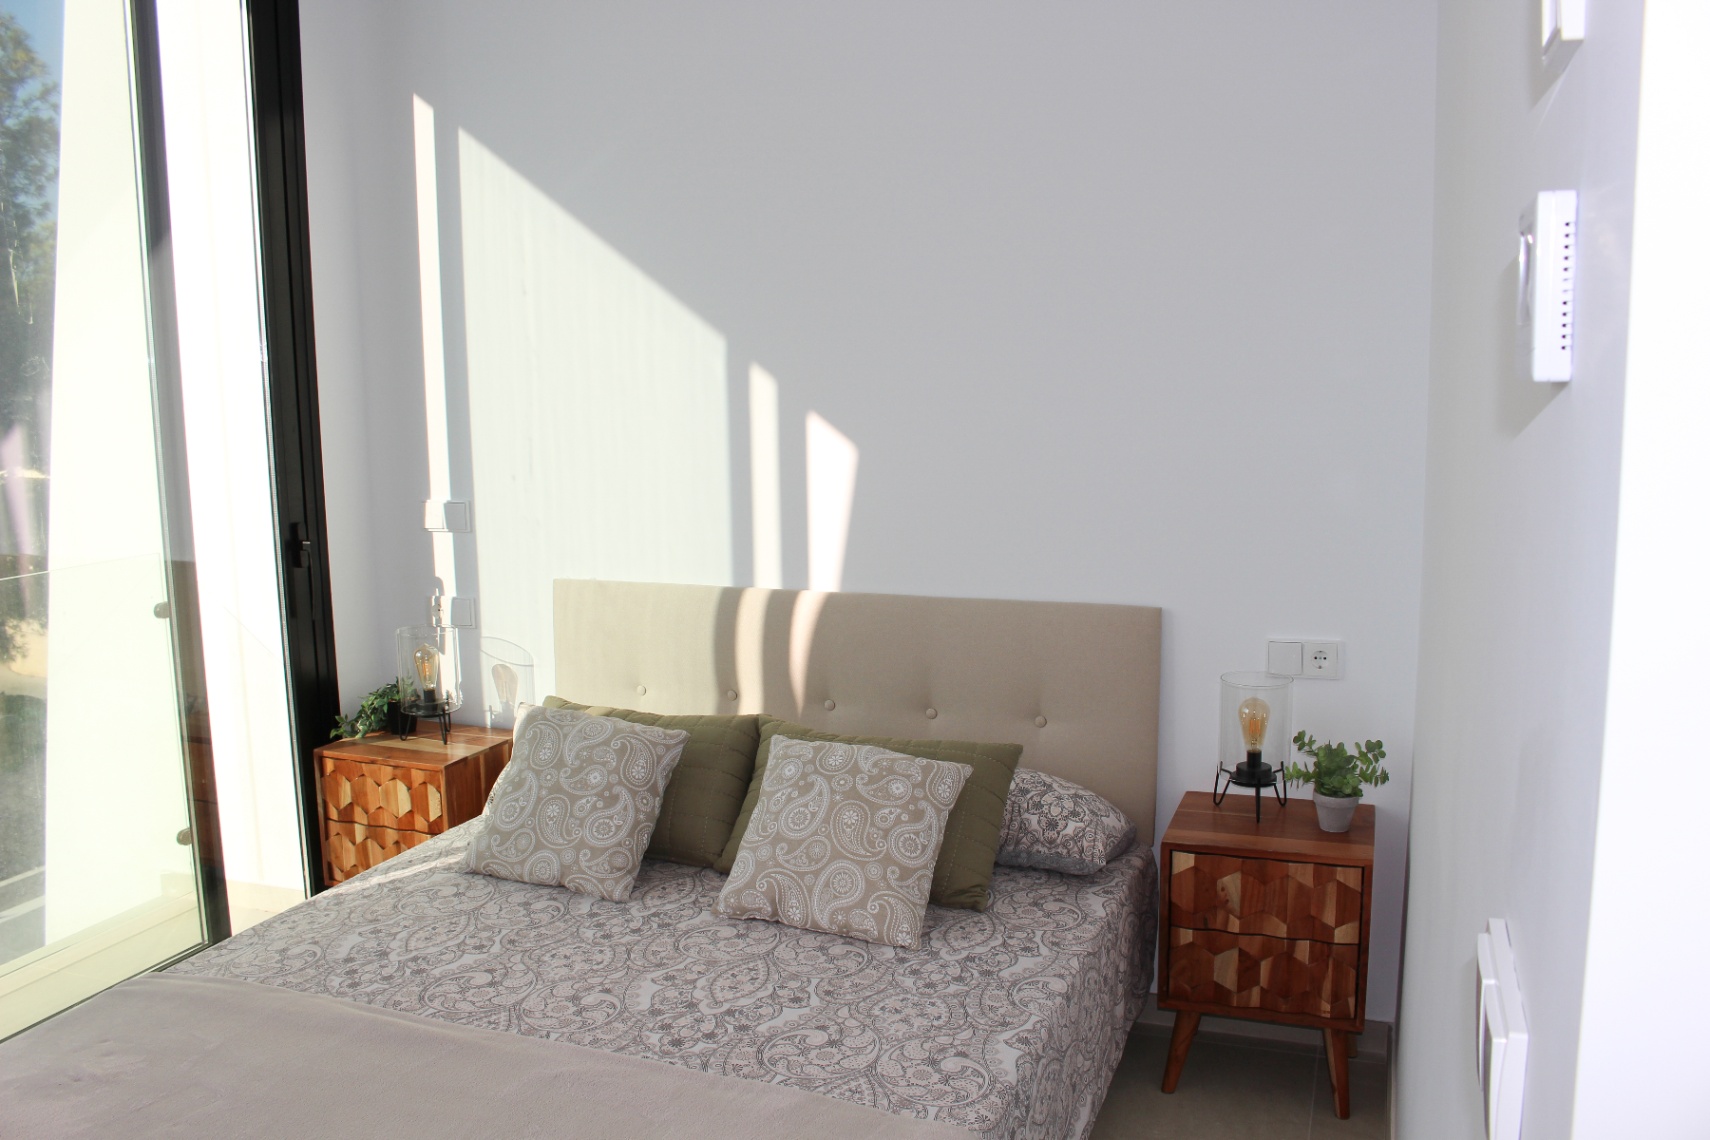 New Build Bungalows in Calpe: Modernity and Comfort on the Costa Blanca